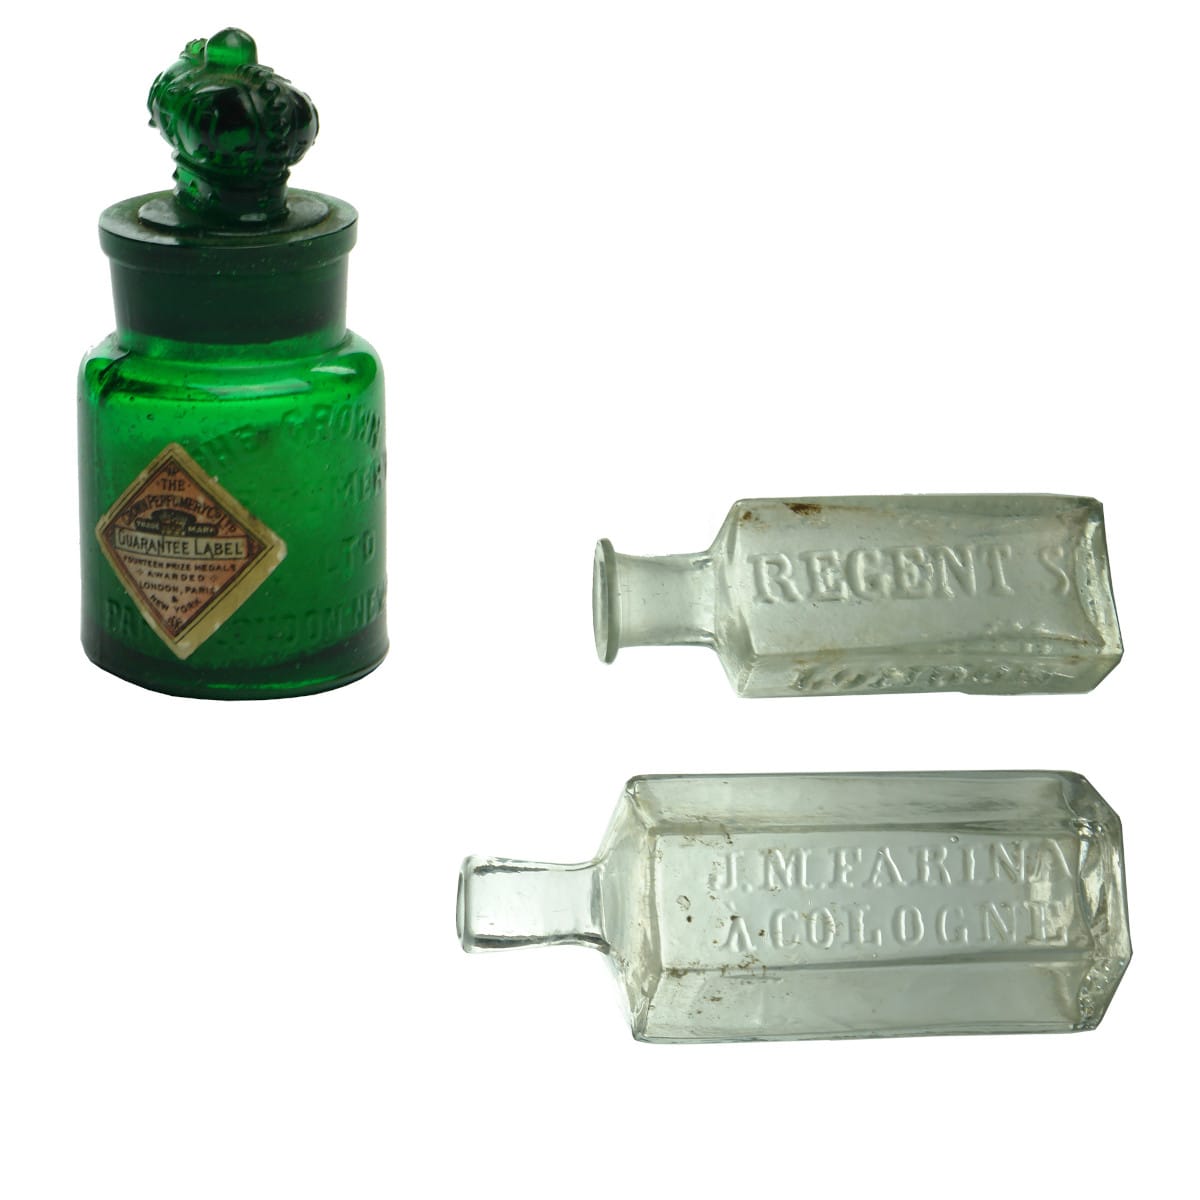 3 Perfumes / Smelling Salts. The Crown Perfumery Co Ltd. Original Crown Stopper. Label and Contents. Two pontil scarred bottles: Farina, Cologne and Macassar Oil, Regent St., London.